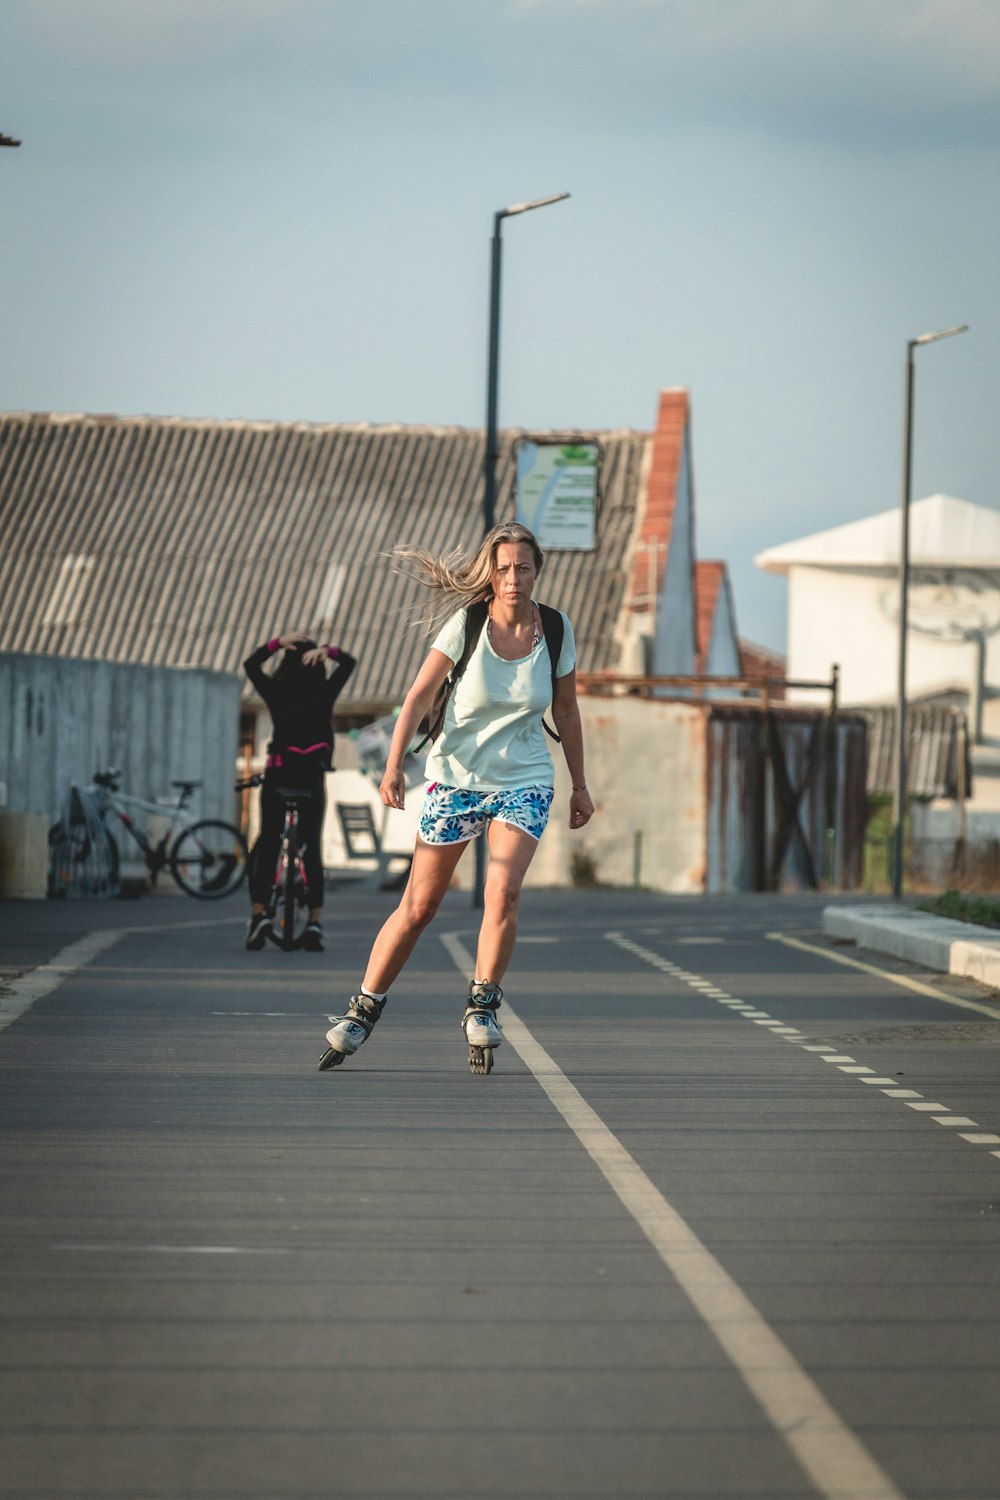 woman riding roller blades on road during daytime